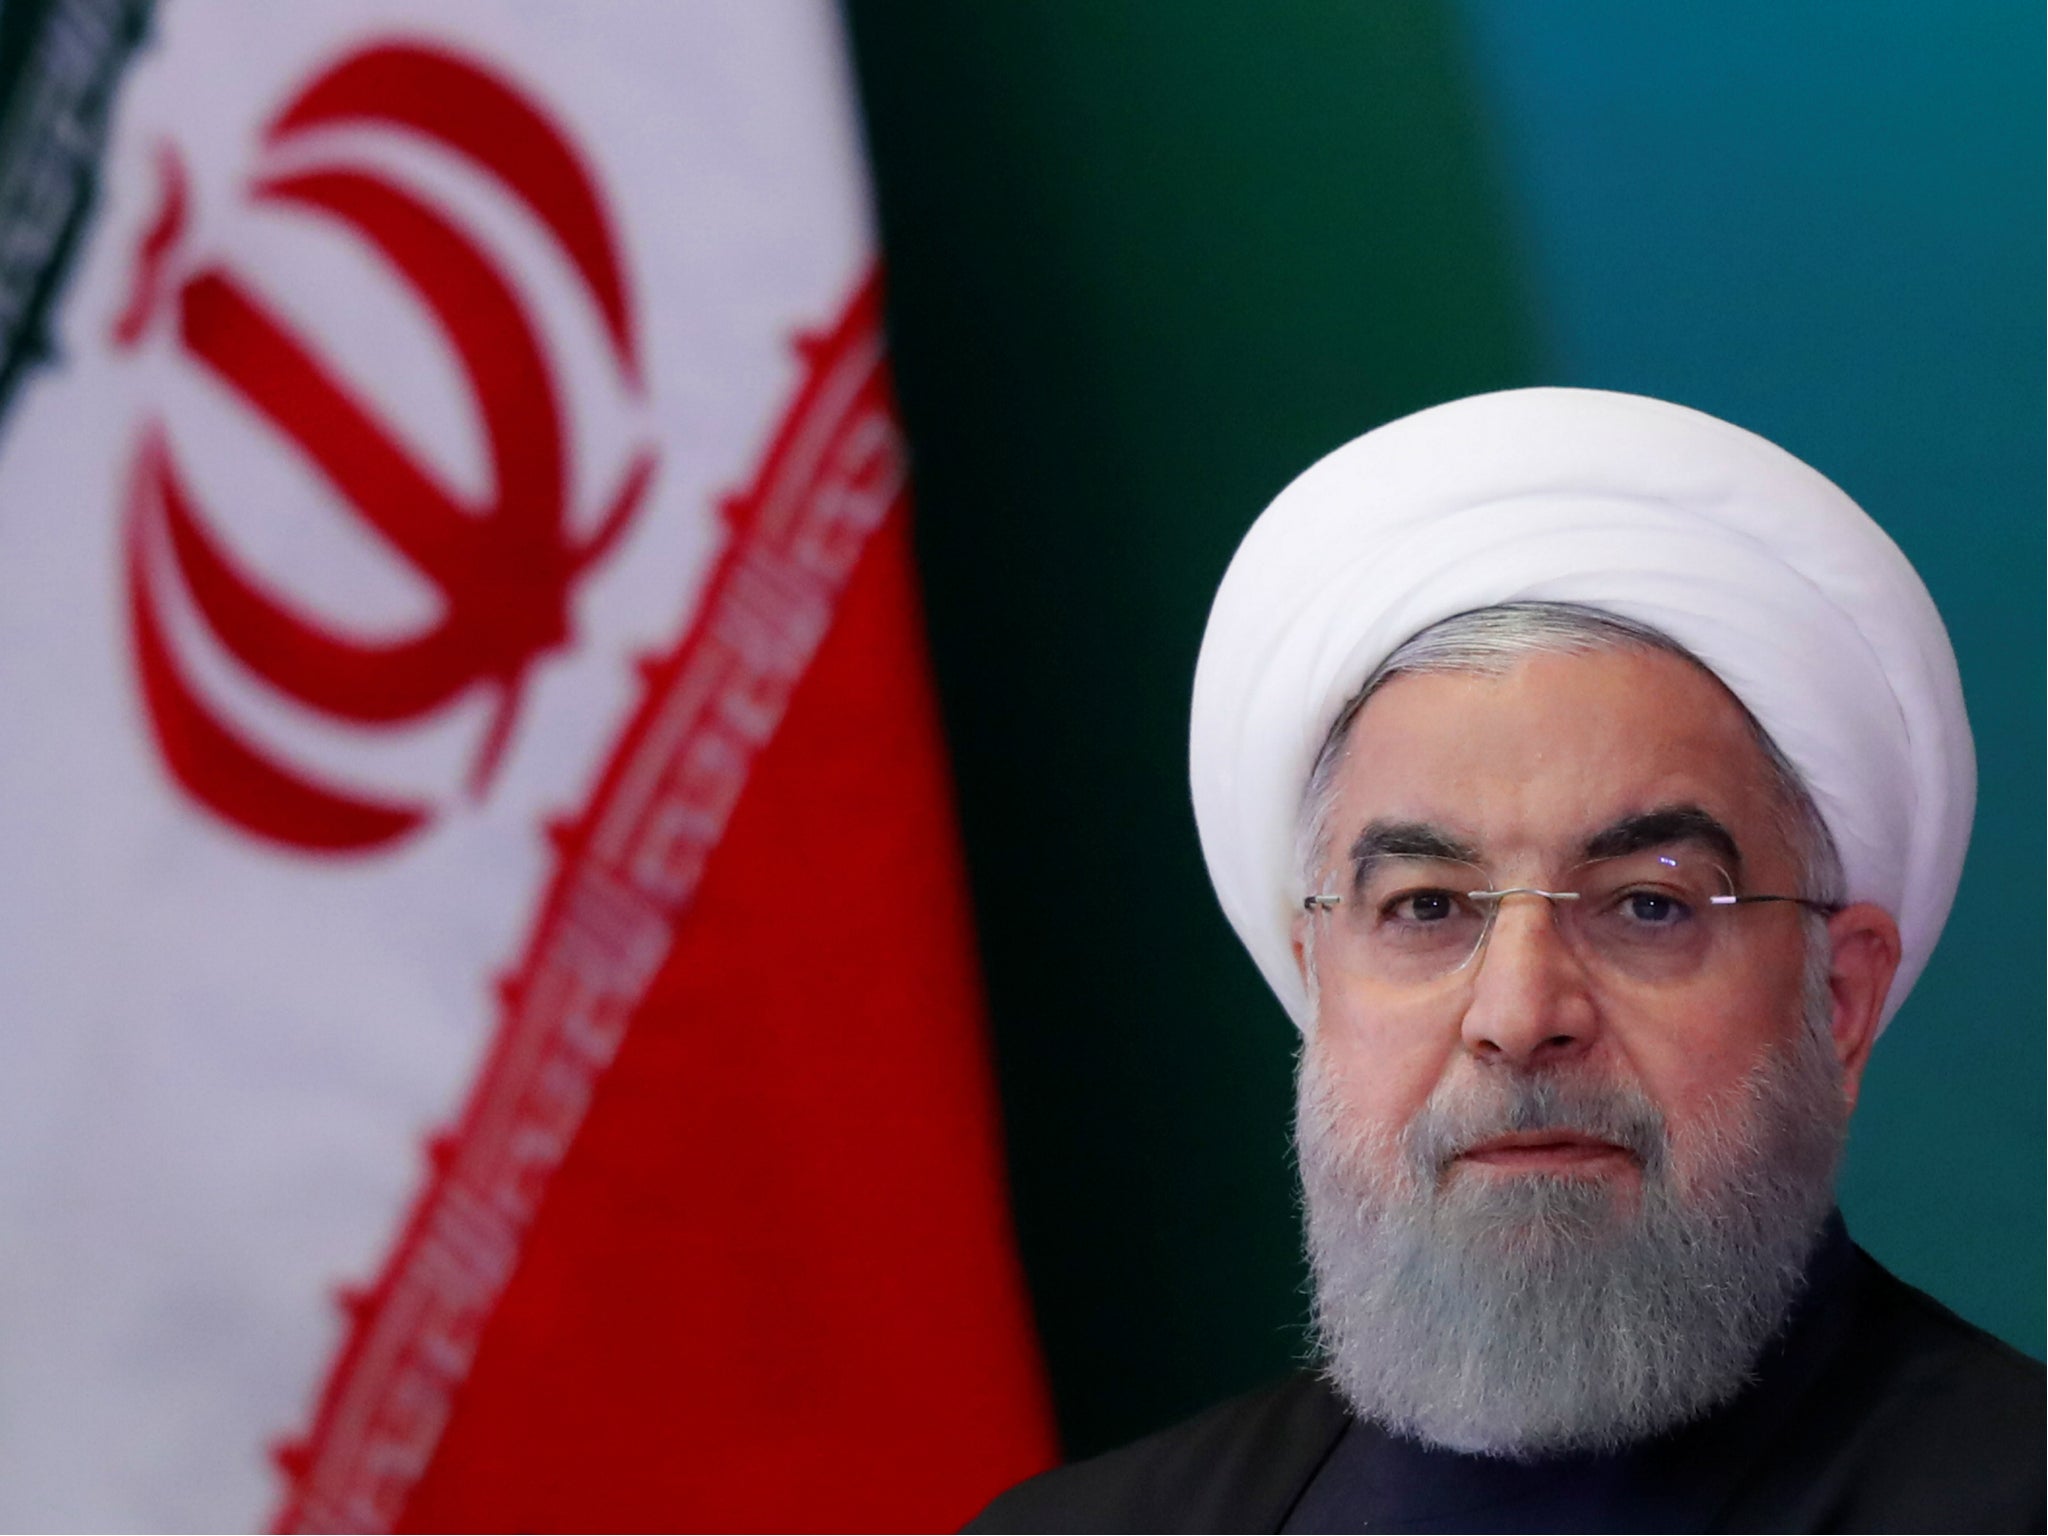 Iranian President Hassan Rouhani questioned Mr Pompeo’s credentials as a former CIA chief to make decisions 'affecting Iran and the world'